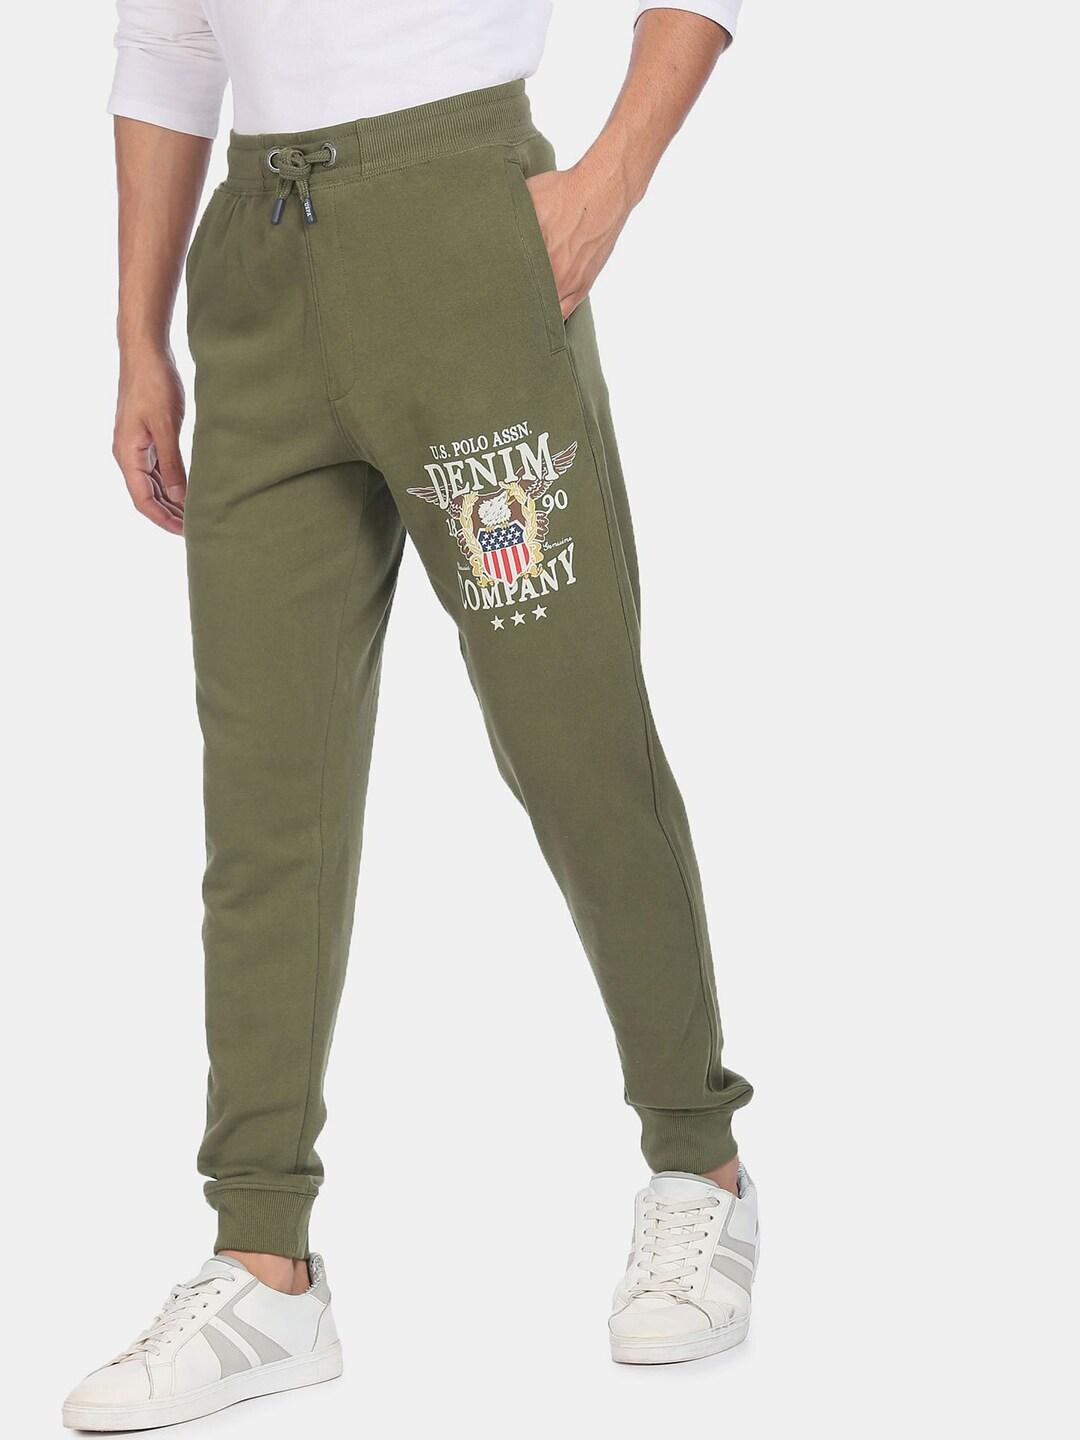 U.S. Polo Assn. Denim Co. Men Olive-Green Solid Straight-Fit Joggers